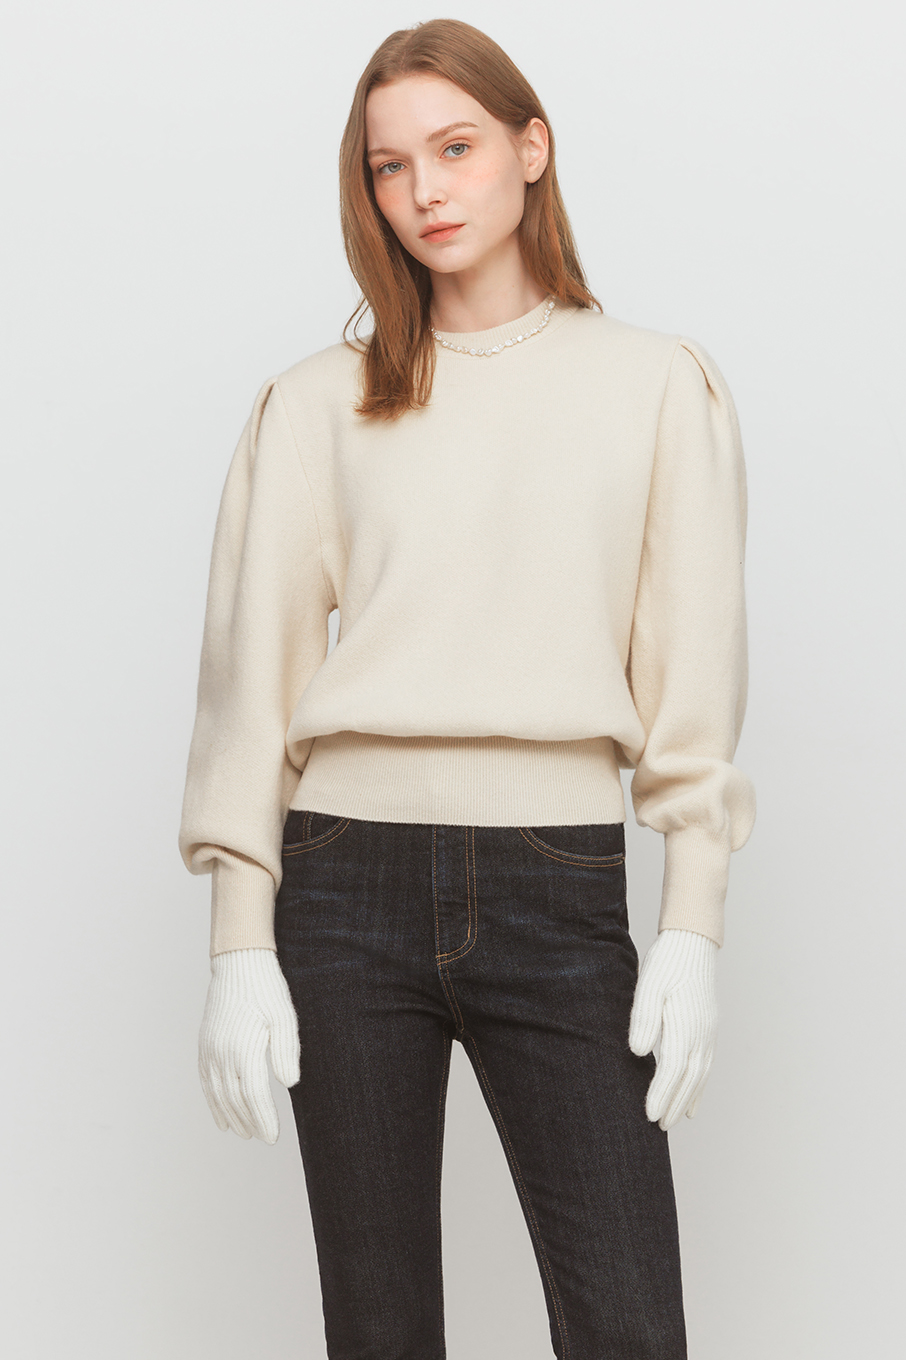 Sote knit top (Ivory)